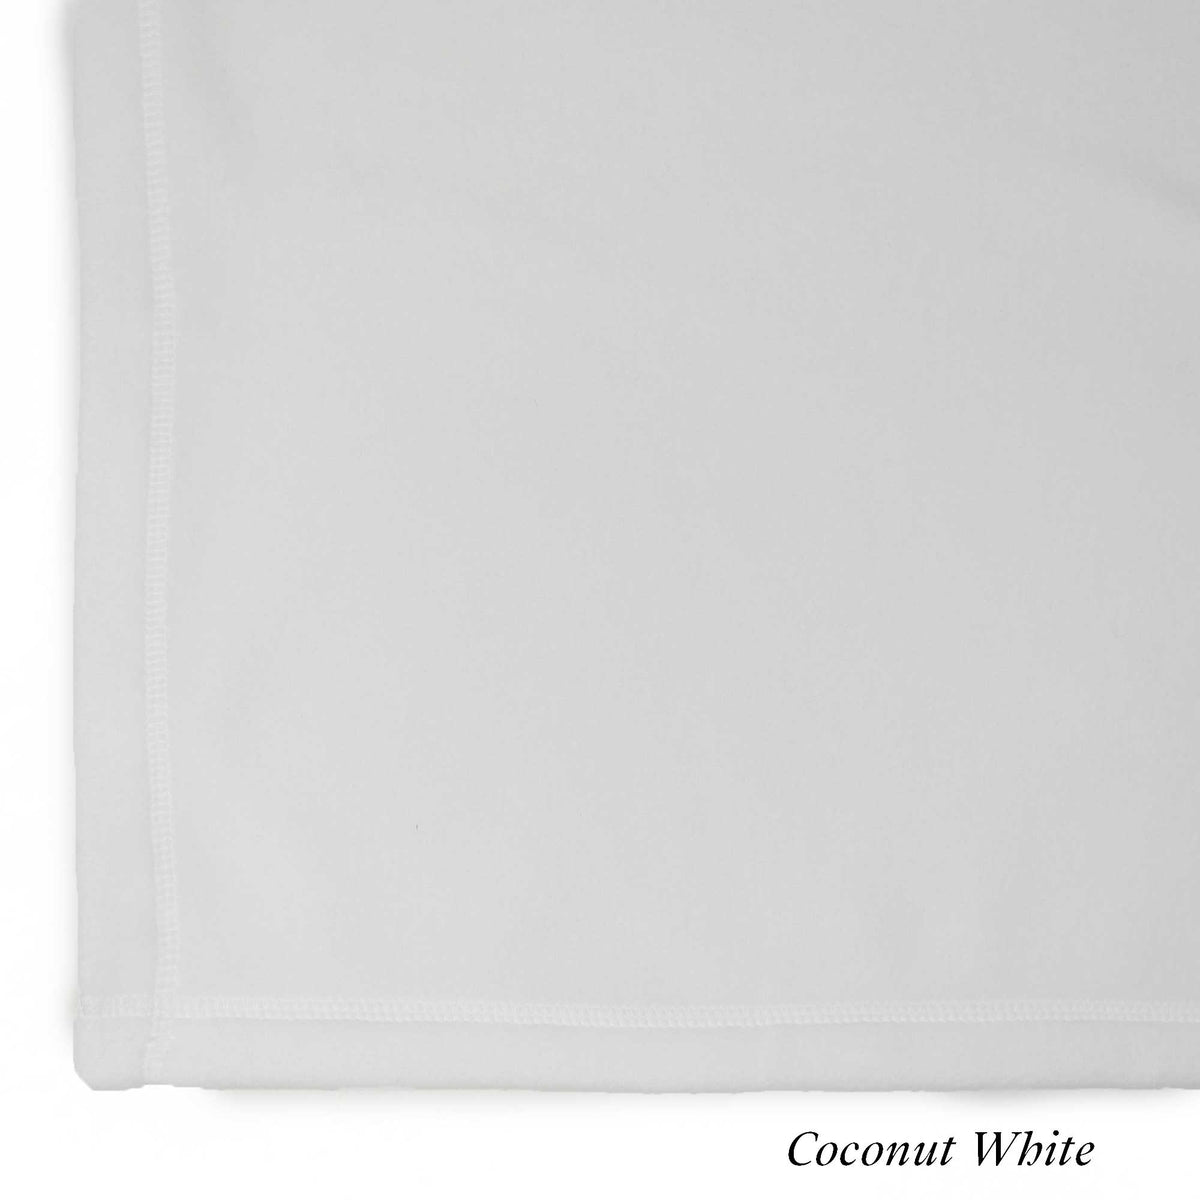 coconut White Swatch - Fleece Pillowcase - Peaceful Touch - American Blanket Company